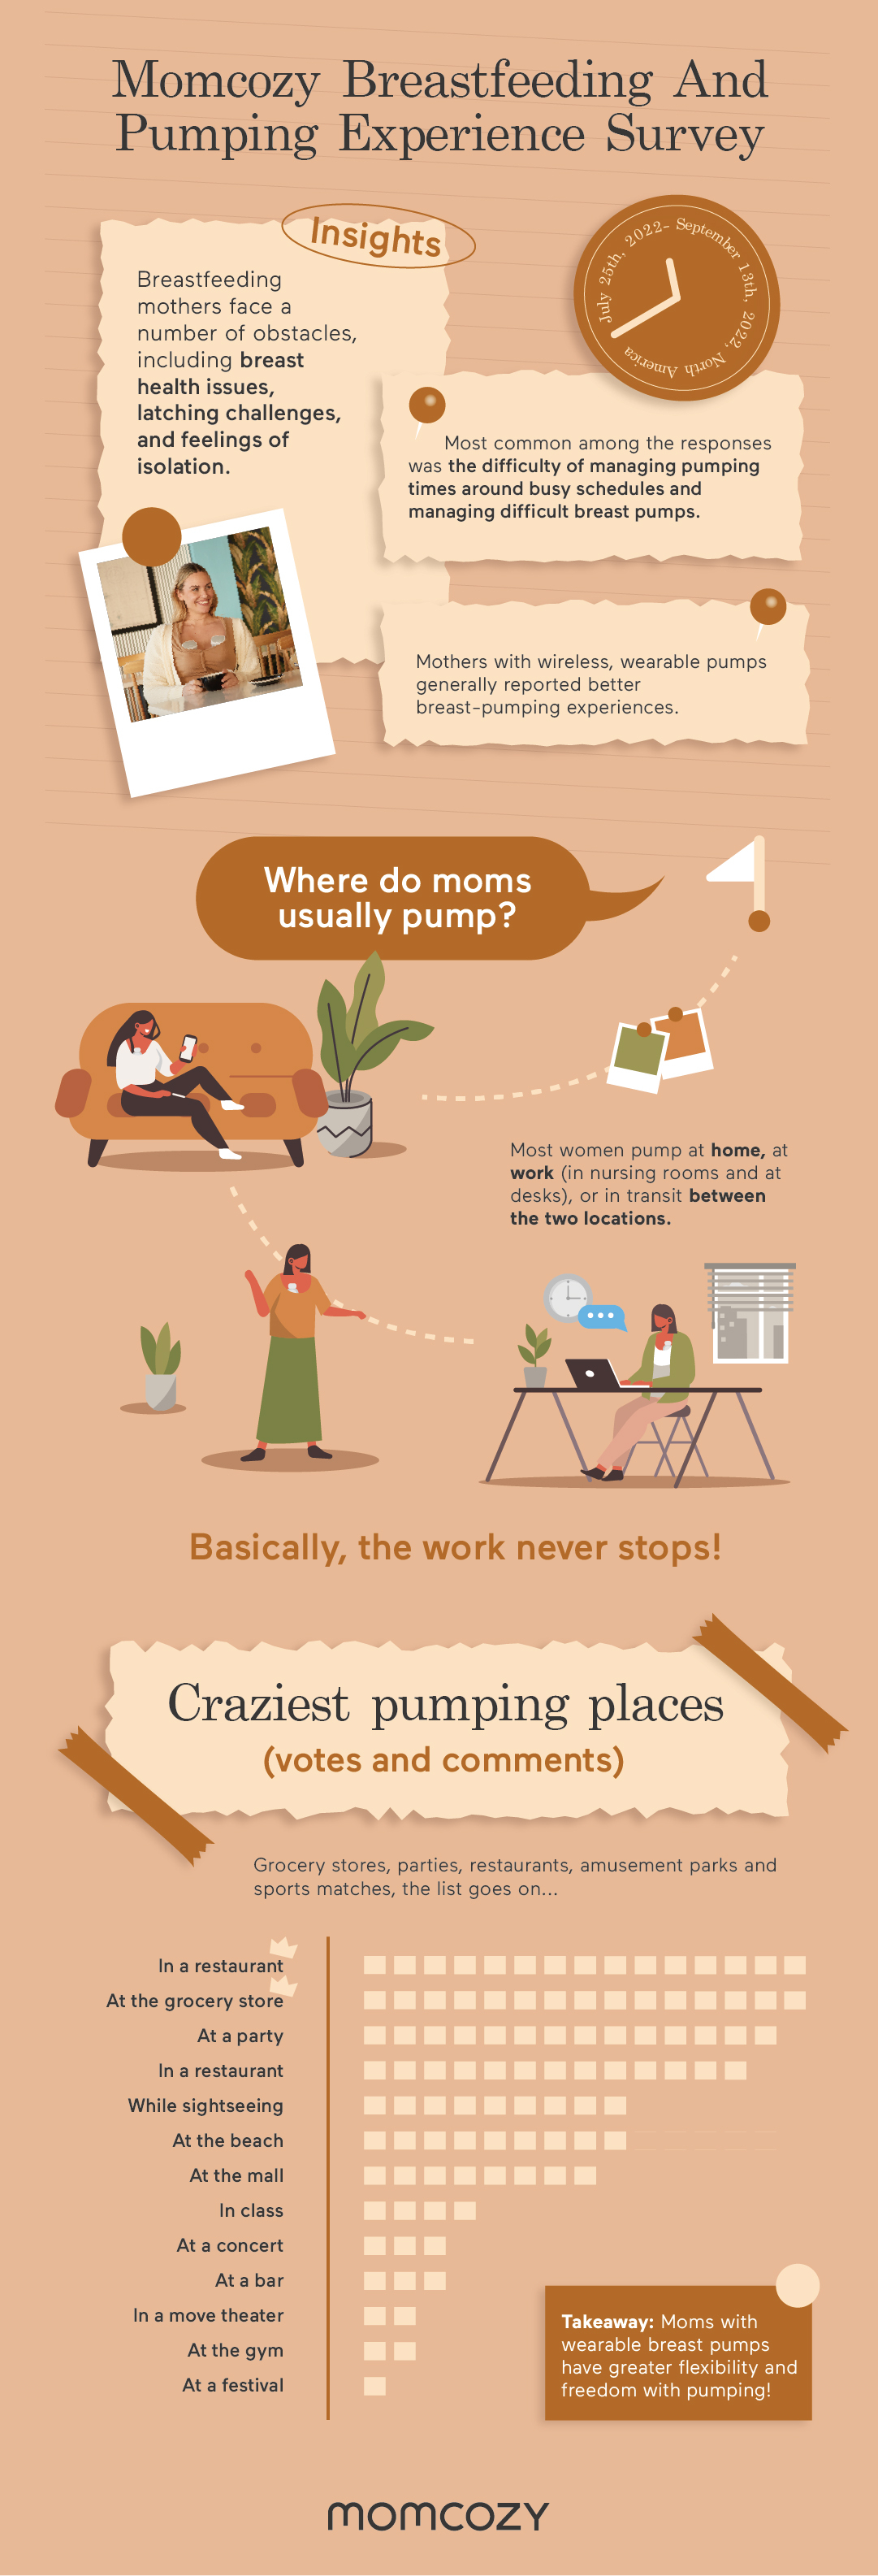 Momcozy Survey Finds Moms Face Biggest Challenges of Time and Breast Pump  Management, When Referring to Breastfeeding and Pumping Demands